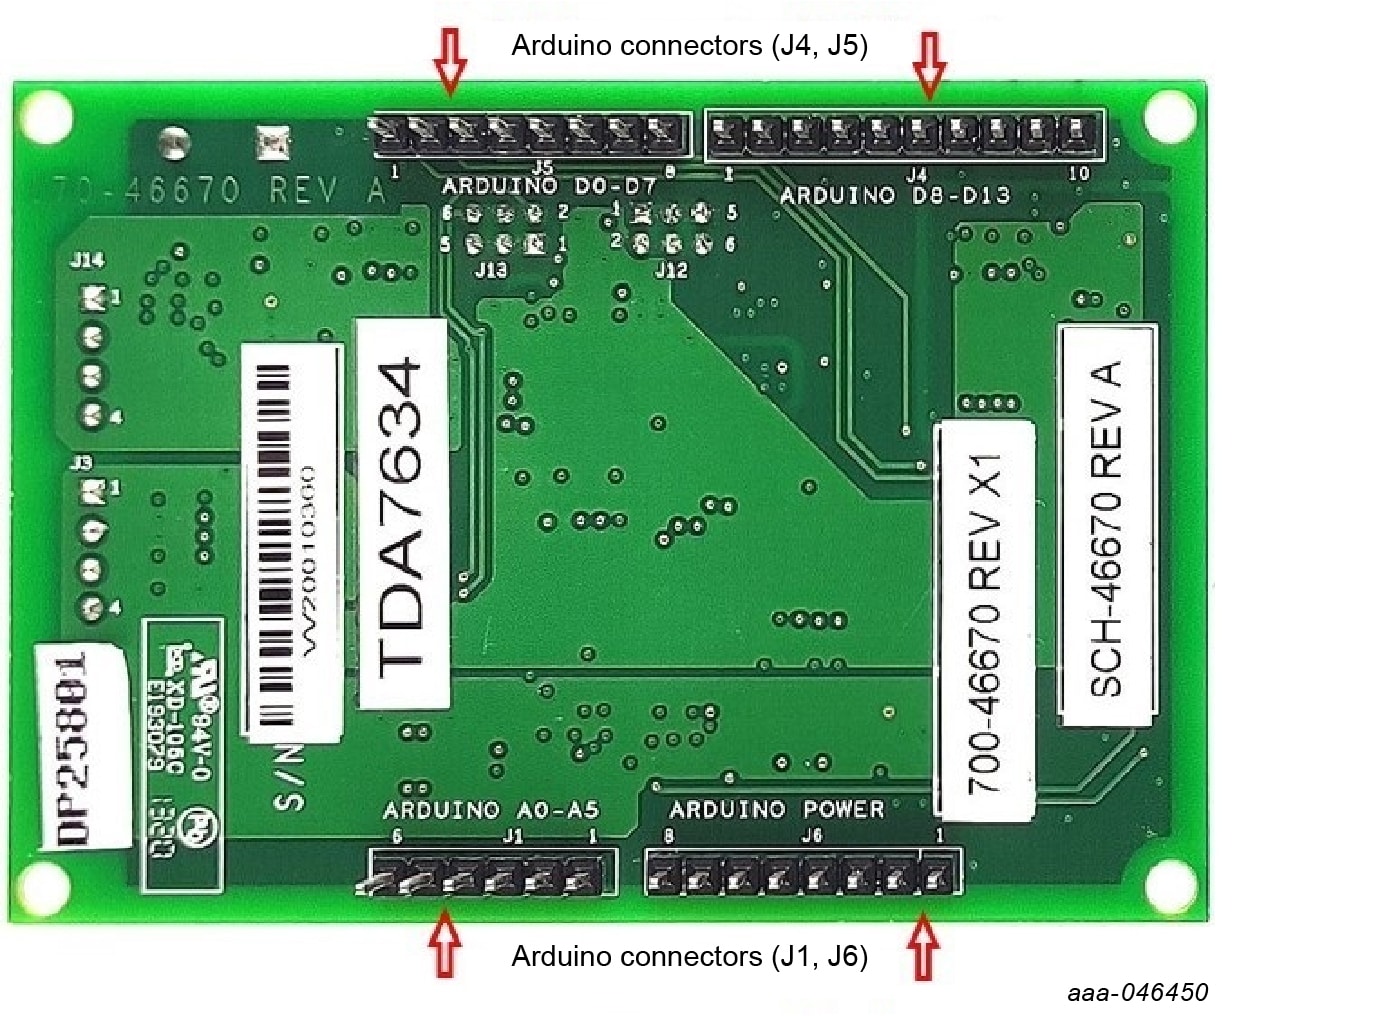 Overview of the PCA9846PW-ARD board